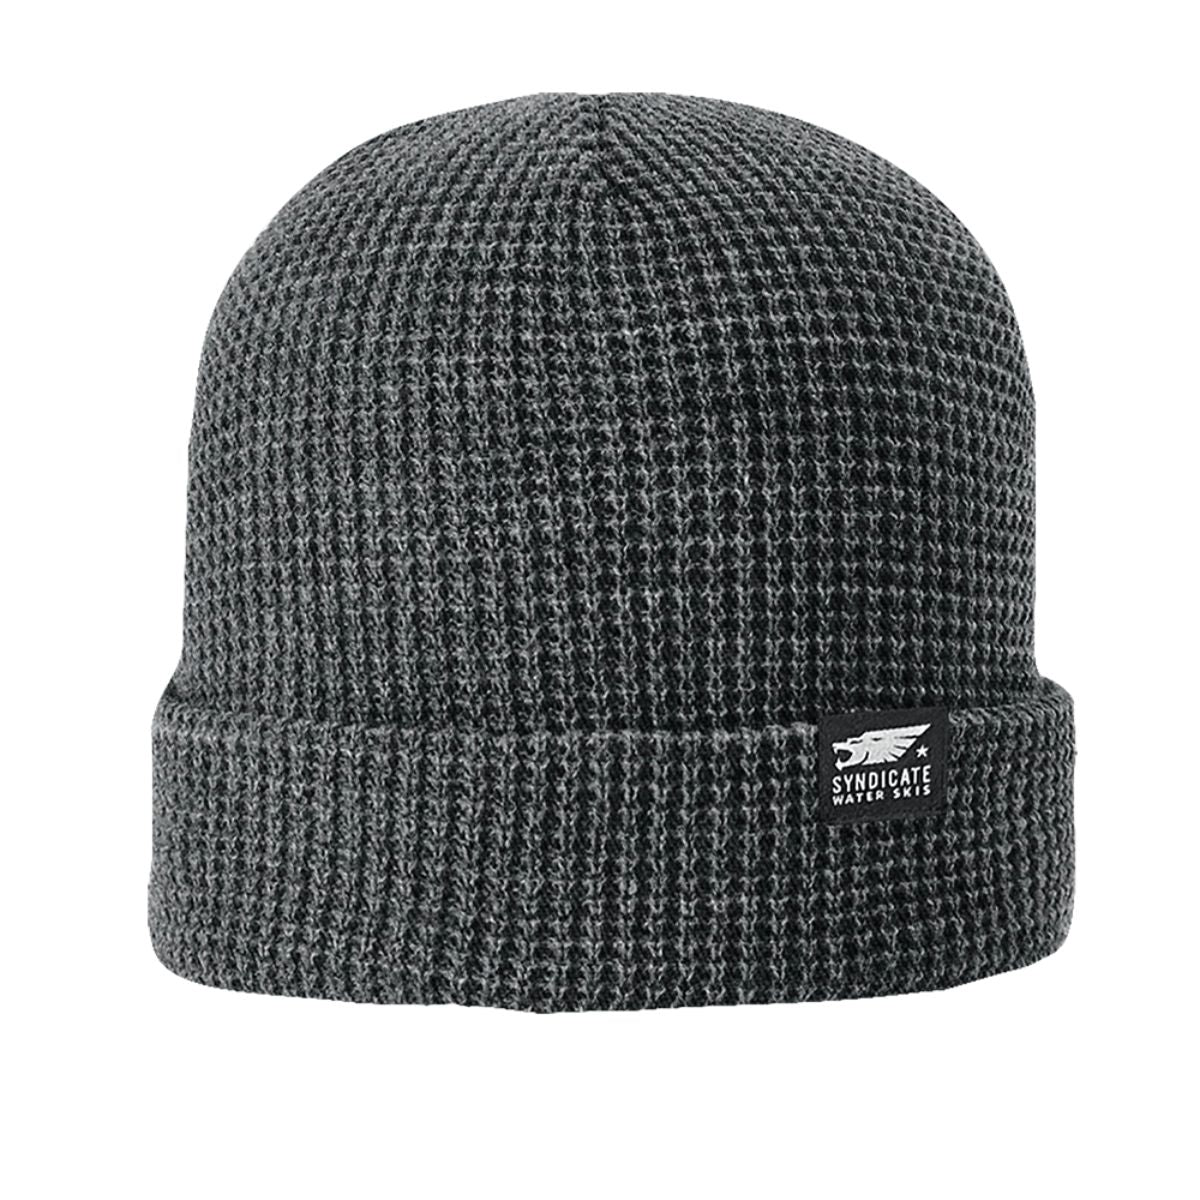 HO Syndicate Rolled Beanie in Heather - BoardCo